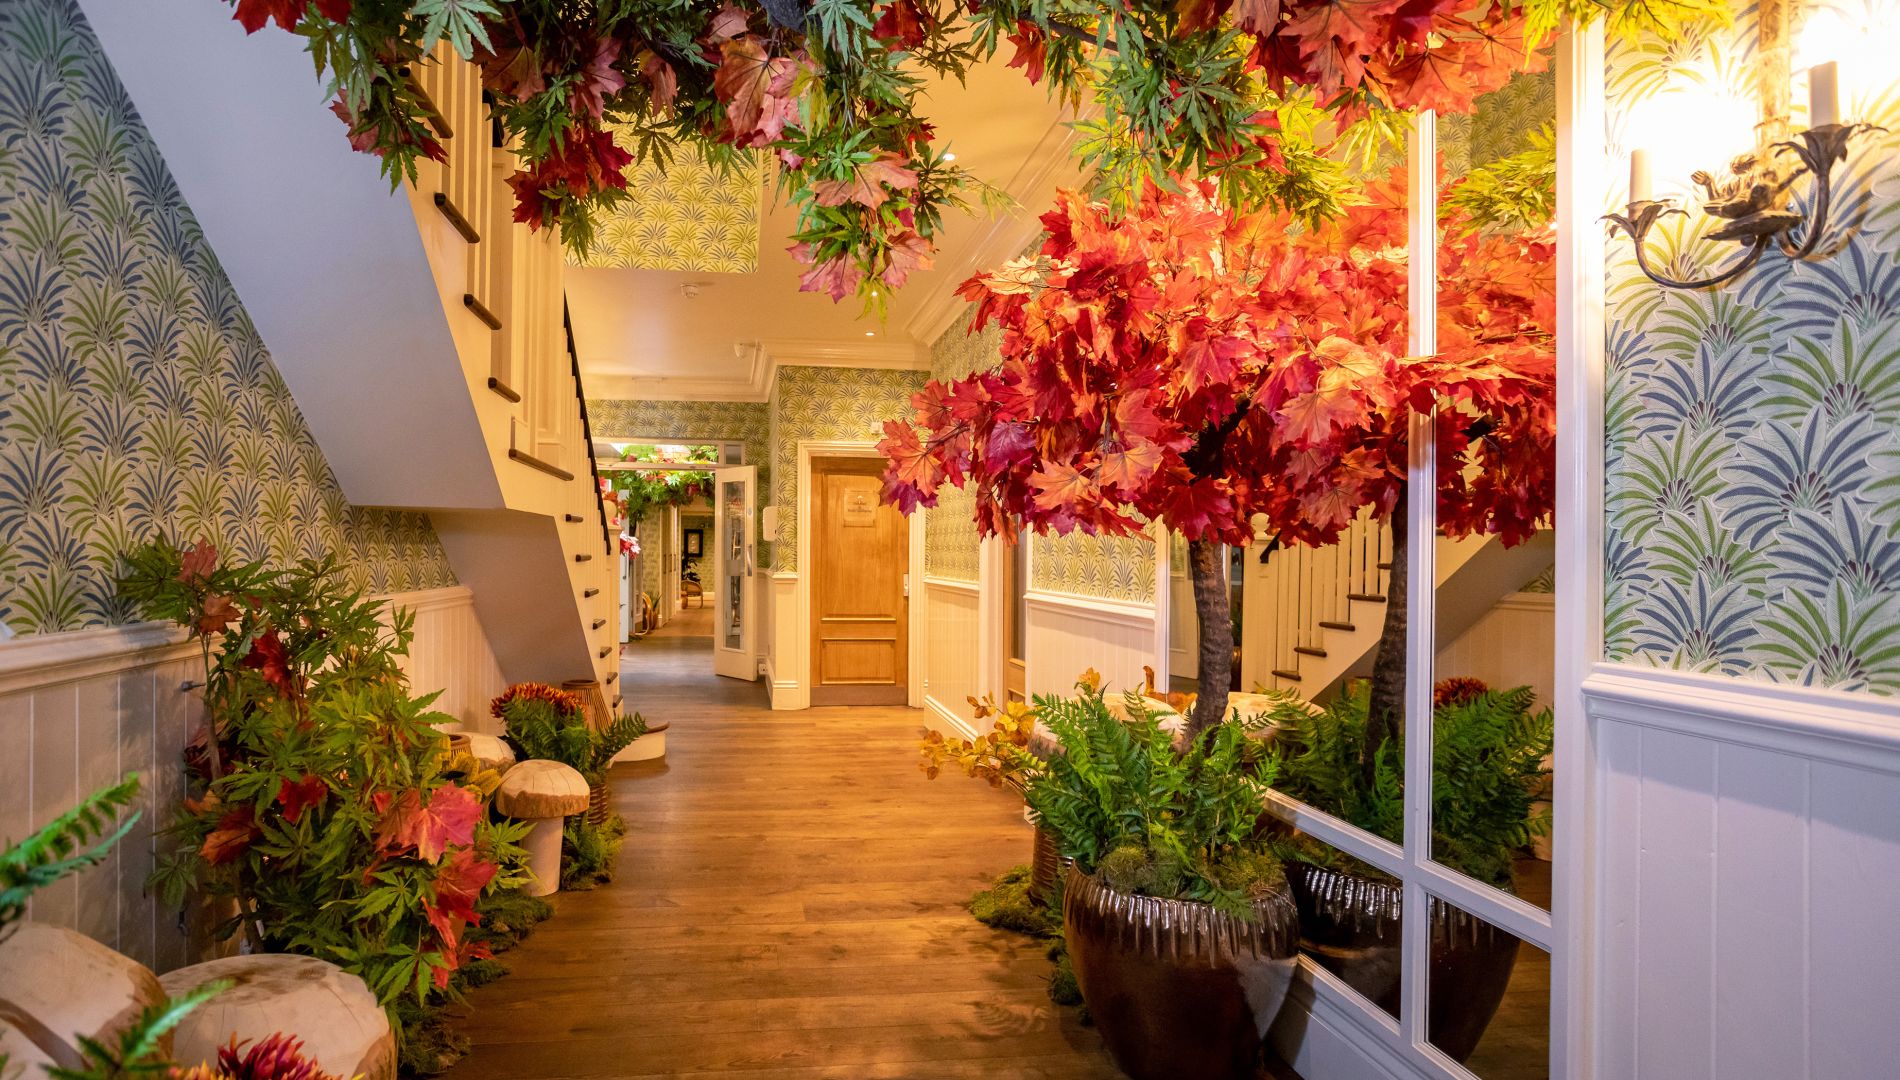 A Walkway With Plants And Flowers